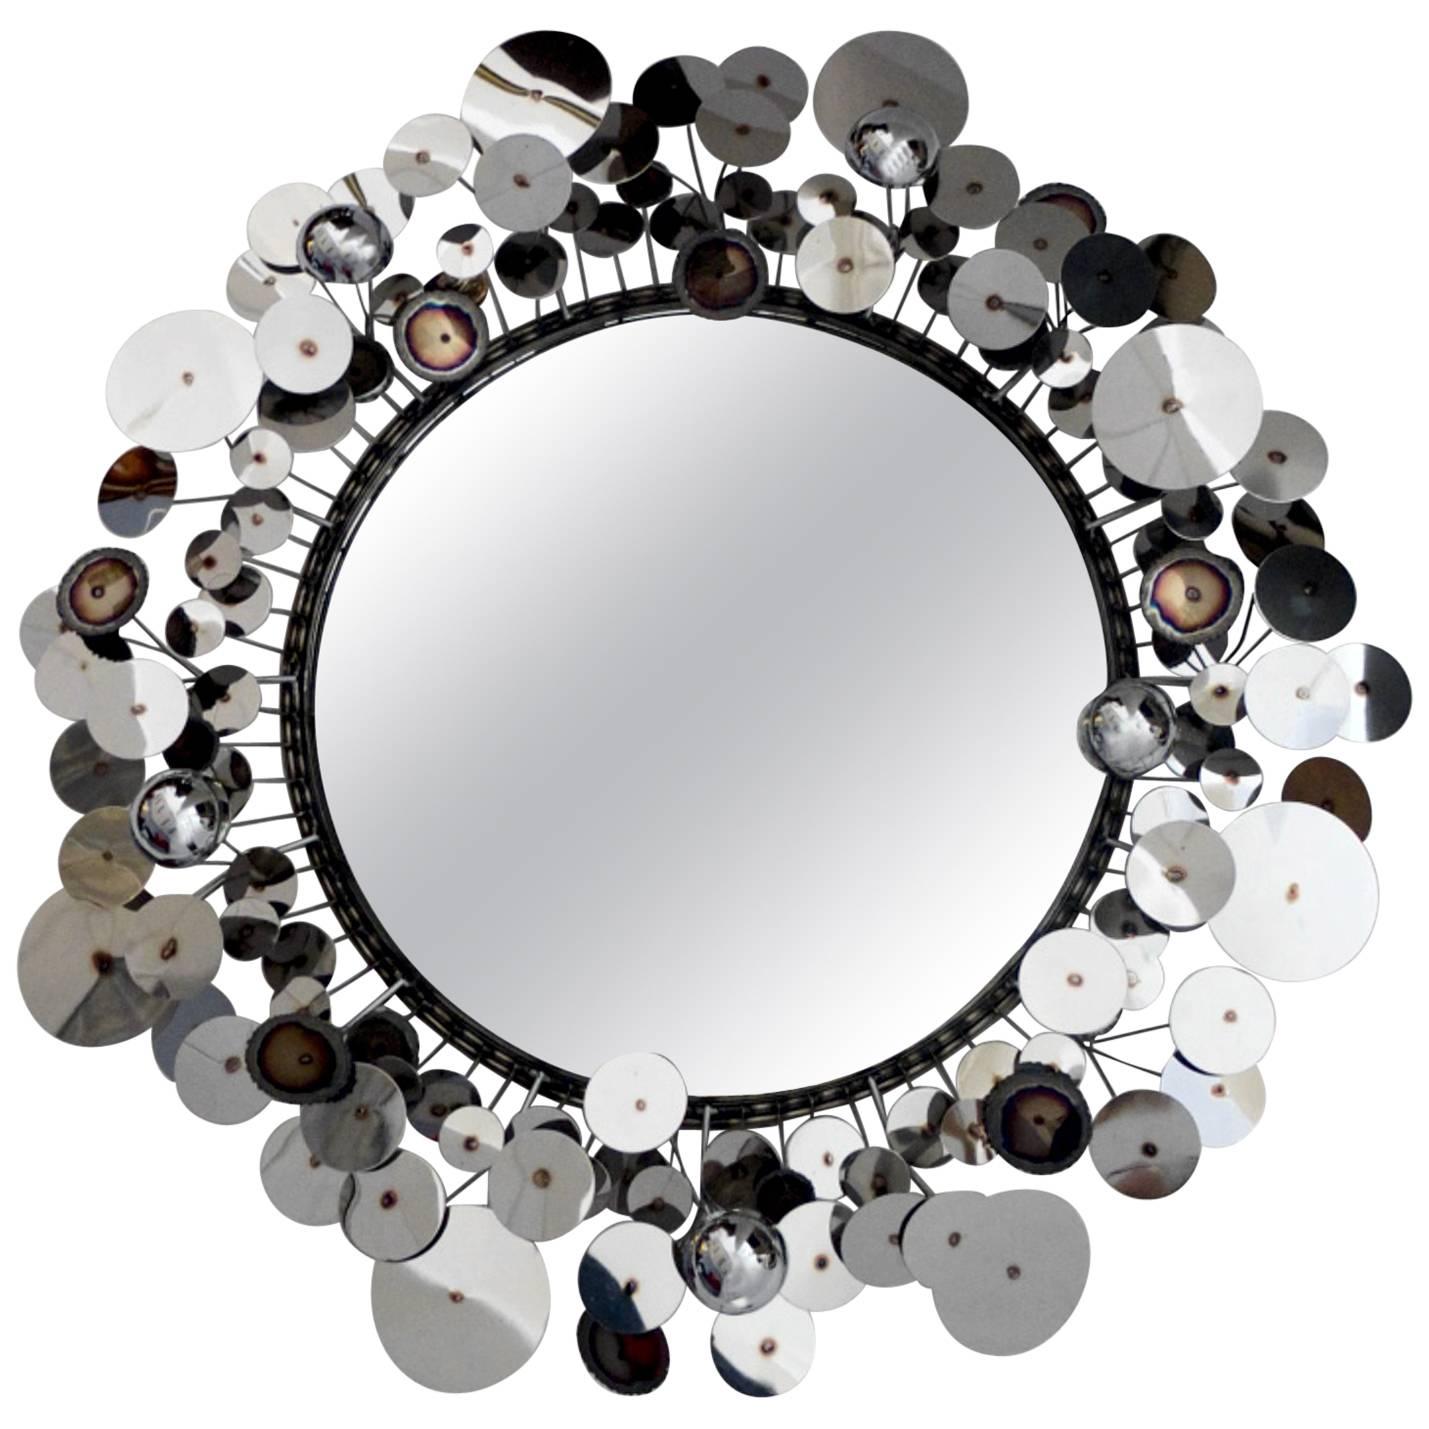 Curtis Jere Raindrops Silver Chrome Disc Sculpture Wall Mirror by Artisan House